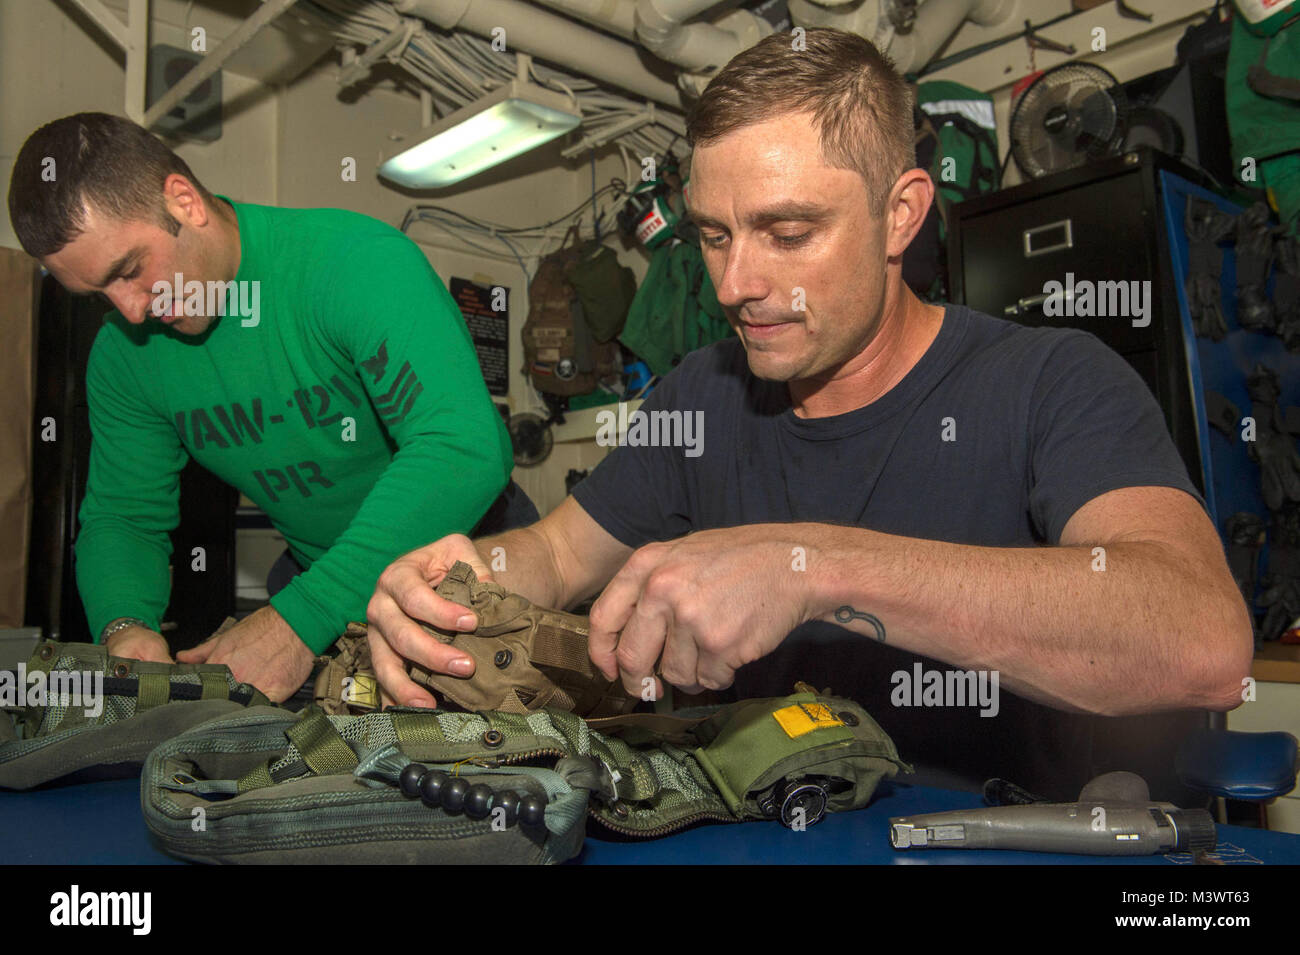 ARABIAN GULF (Oct. 4, 2017) Aircrew Survival Equipmentman 1st Class Donald Bustin, from Laurel, Miss., left, and Aircrew Survival Equipmentman 2nd Class William Lane, from Rutherfordton, N.C., both assigned to the “Bluetails” of Carrier Early Warning Squadron (VAW) 121, perform maintenance on a CMU-36 survival vest in the parachute rigger shop aboard the aircraft carrier USS Nimitz (CVN 68). Nimitz is currently deployed in the U.S. 5th Fleet area of operations in support of Operation Inherent Resolve. While in the region, the ship and strike group are conducting maritime security operations to Stock Photo